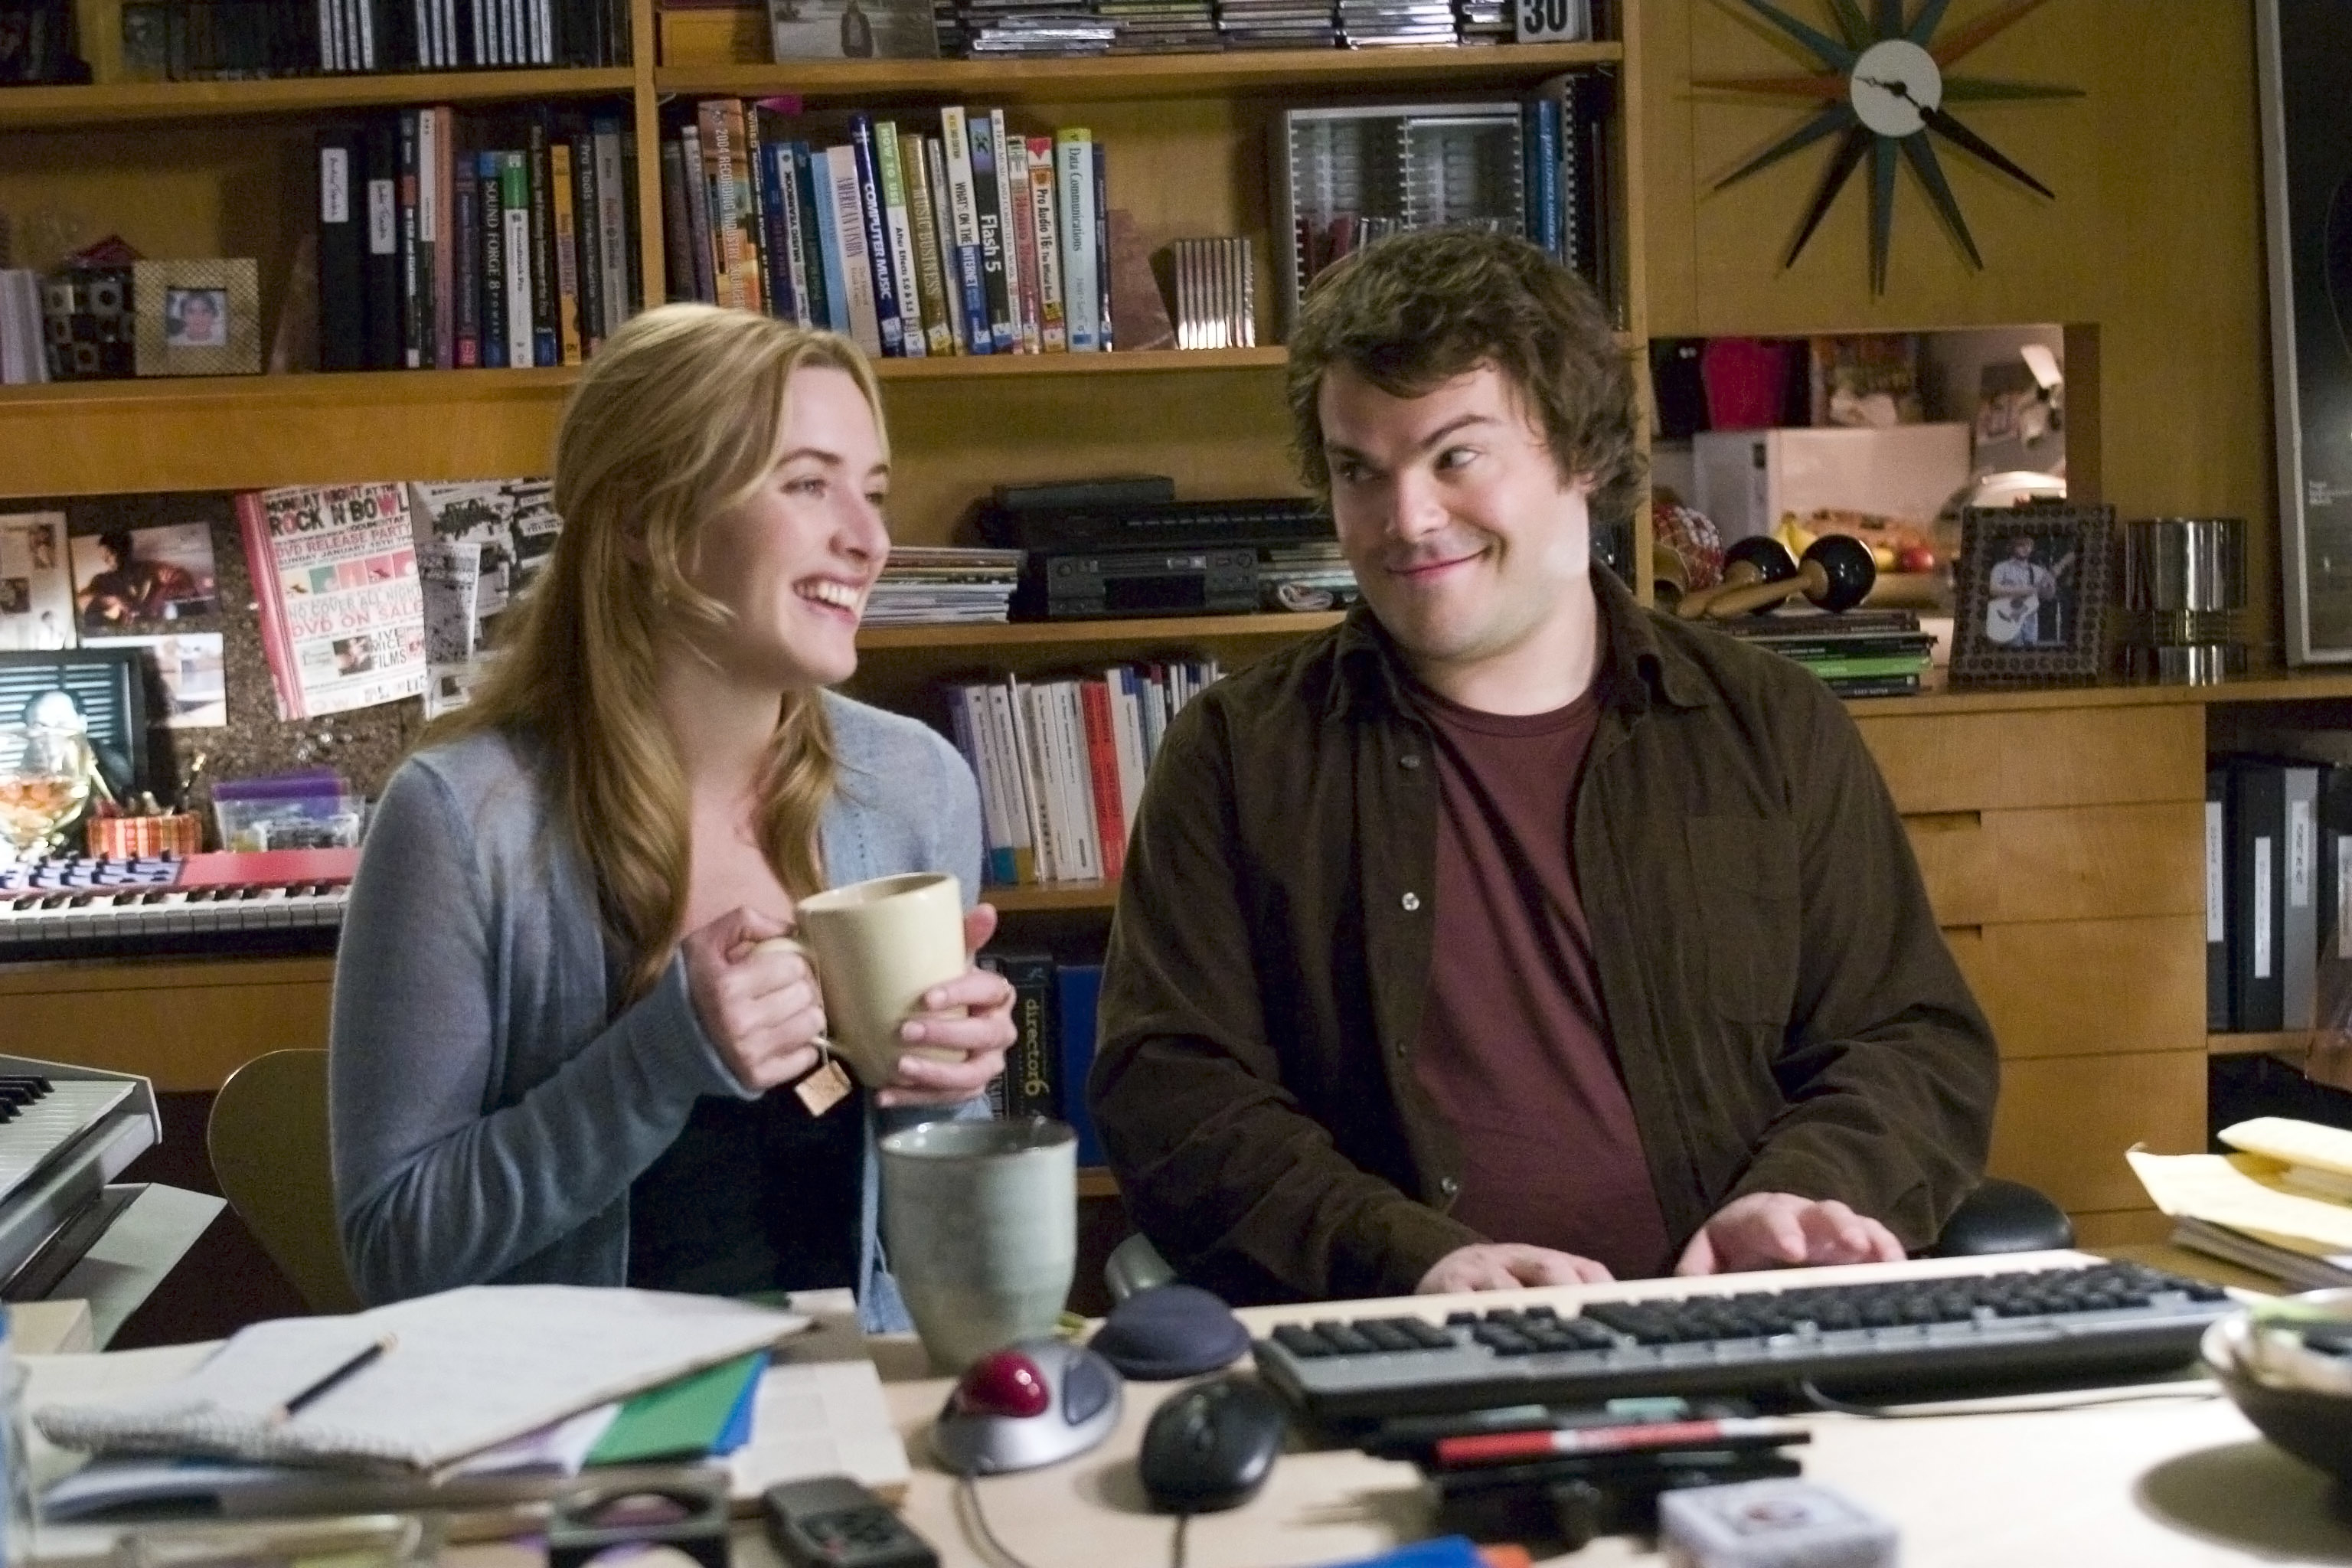 Two characters from a film in an office setting, sharing a light moment by a computer desk